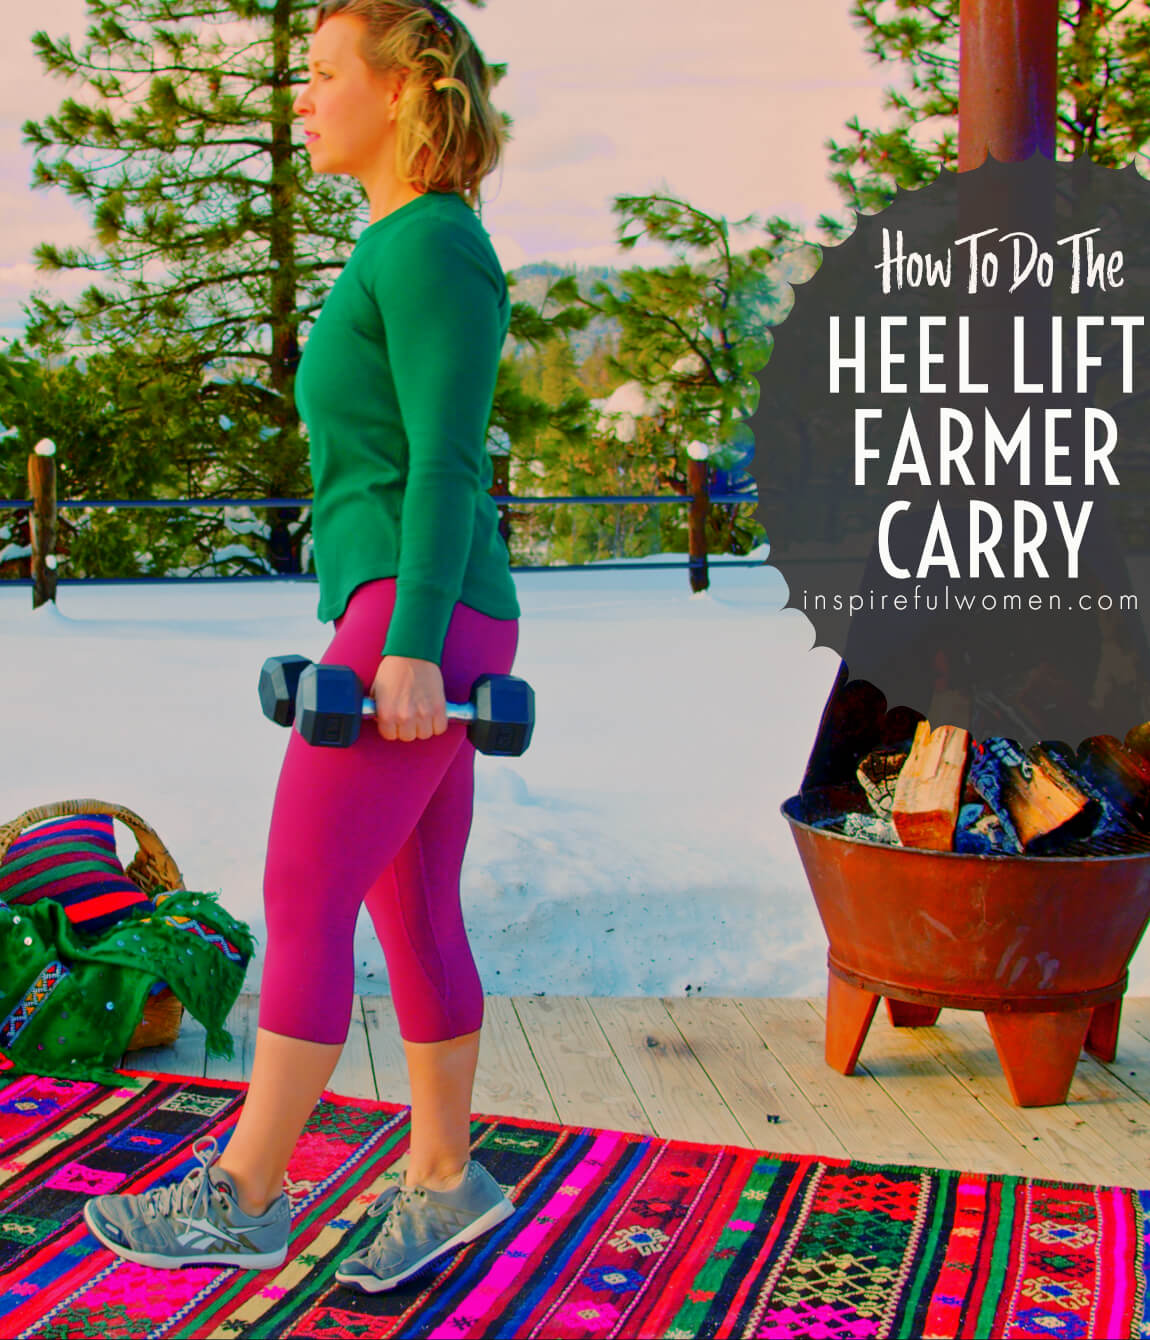 how-to-farmer-carry-heel-lift-dumbbells-calf-muscle-core-exercise-proper-form